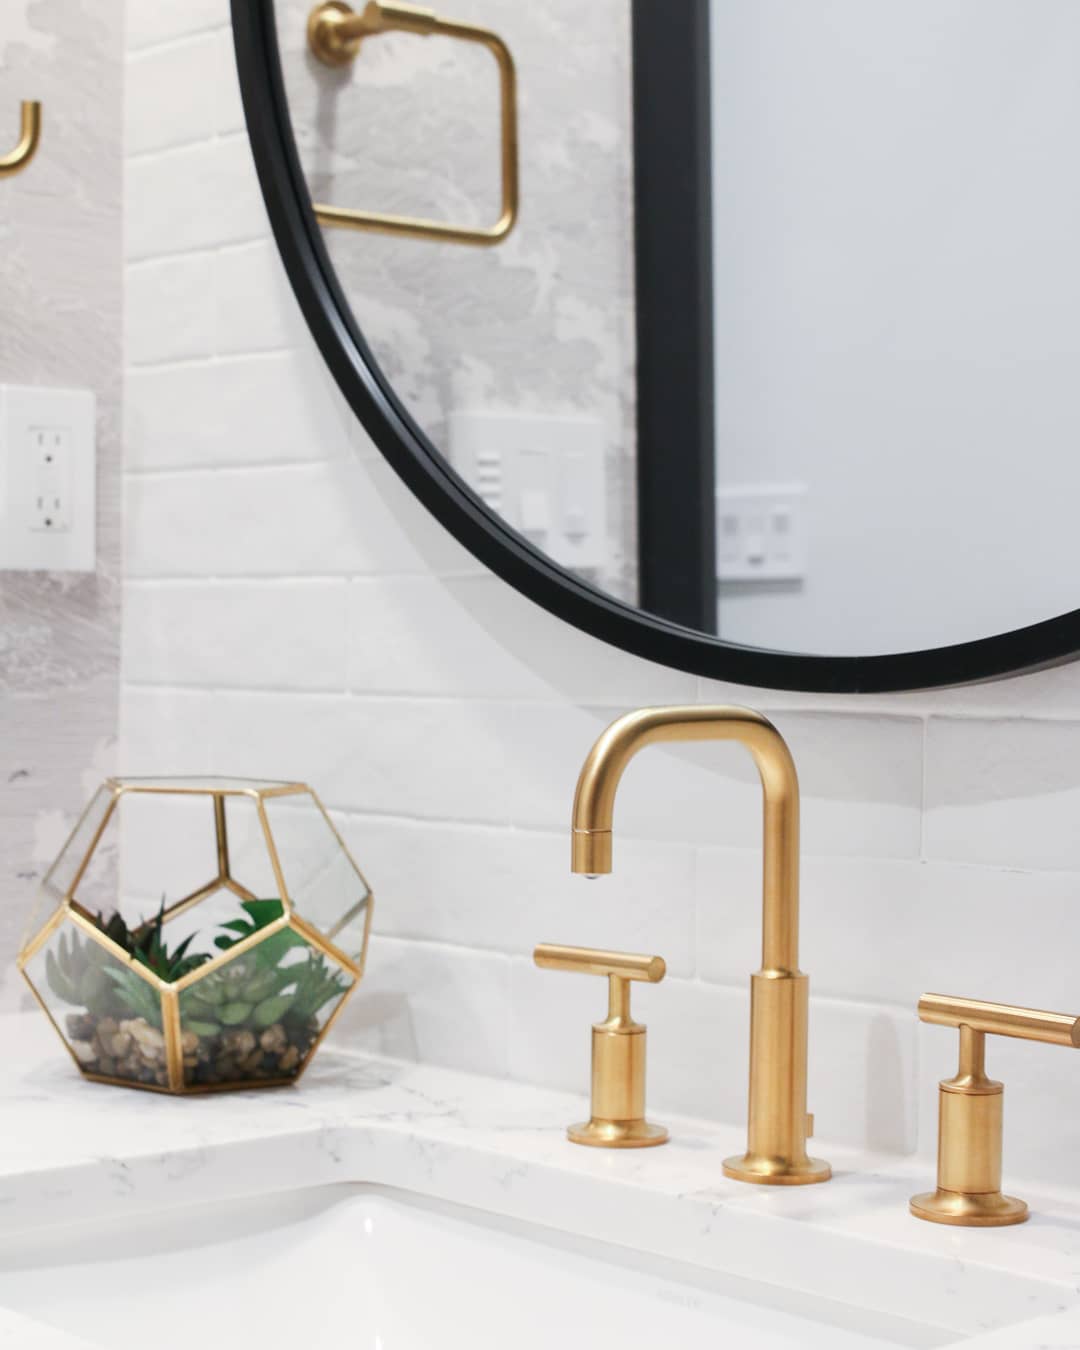 bathroom vanity with new gold faucet photo by Instagram user @beyond_beige